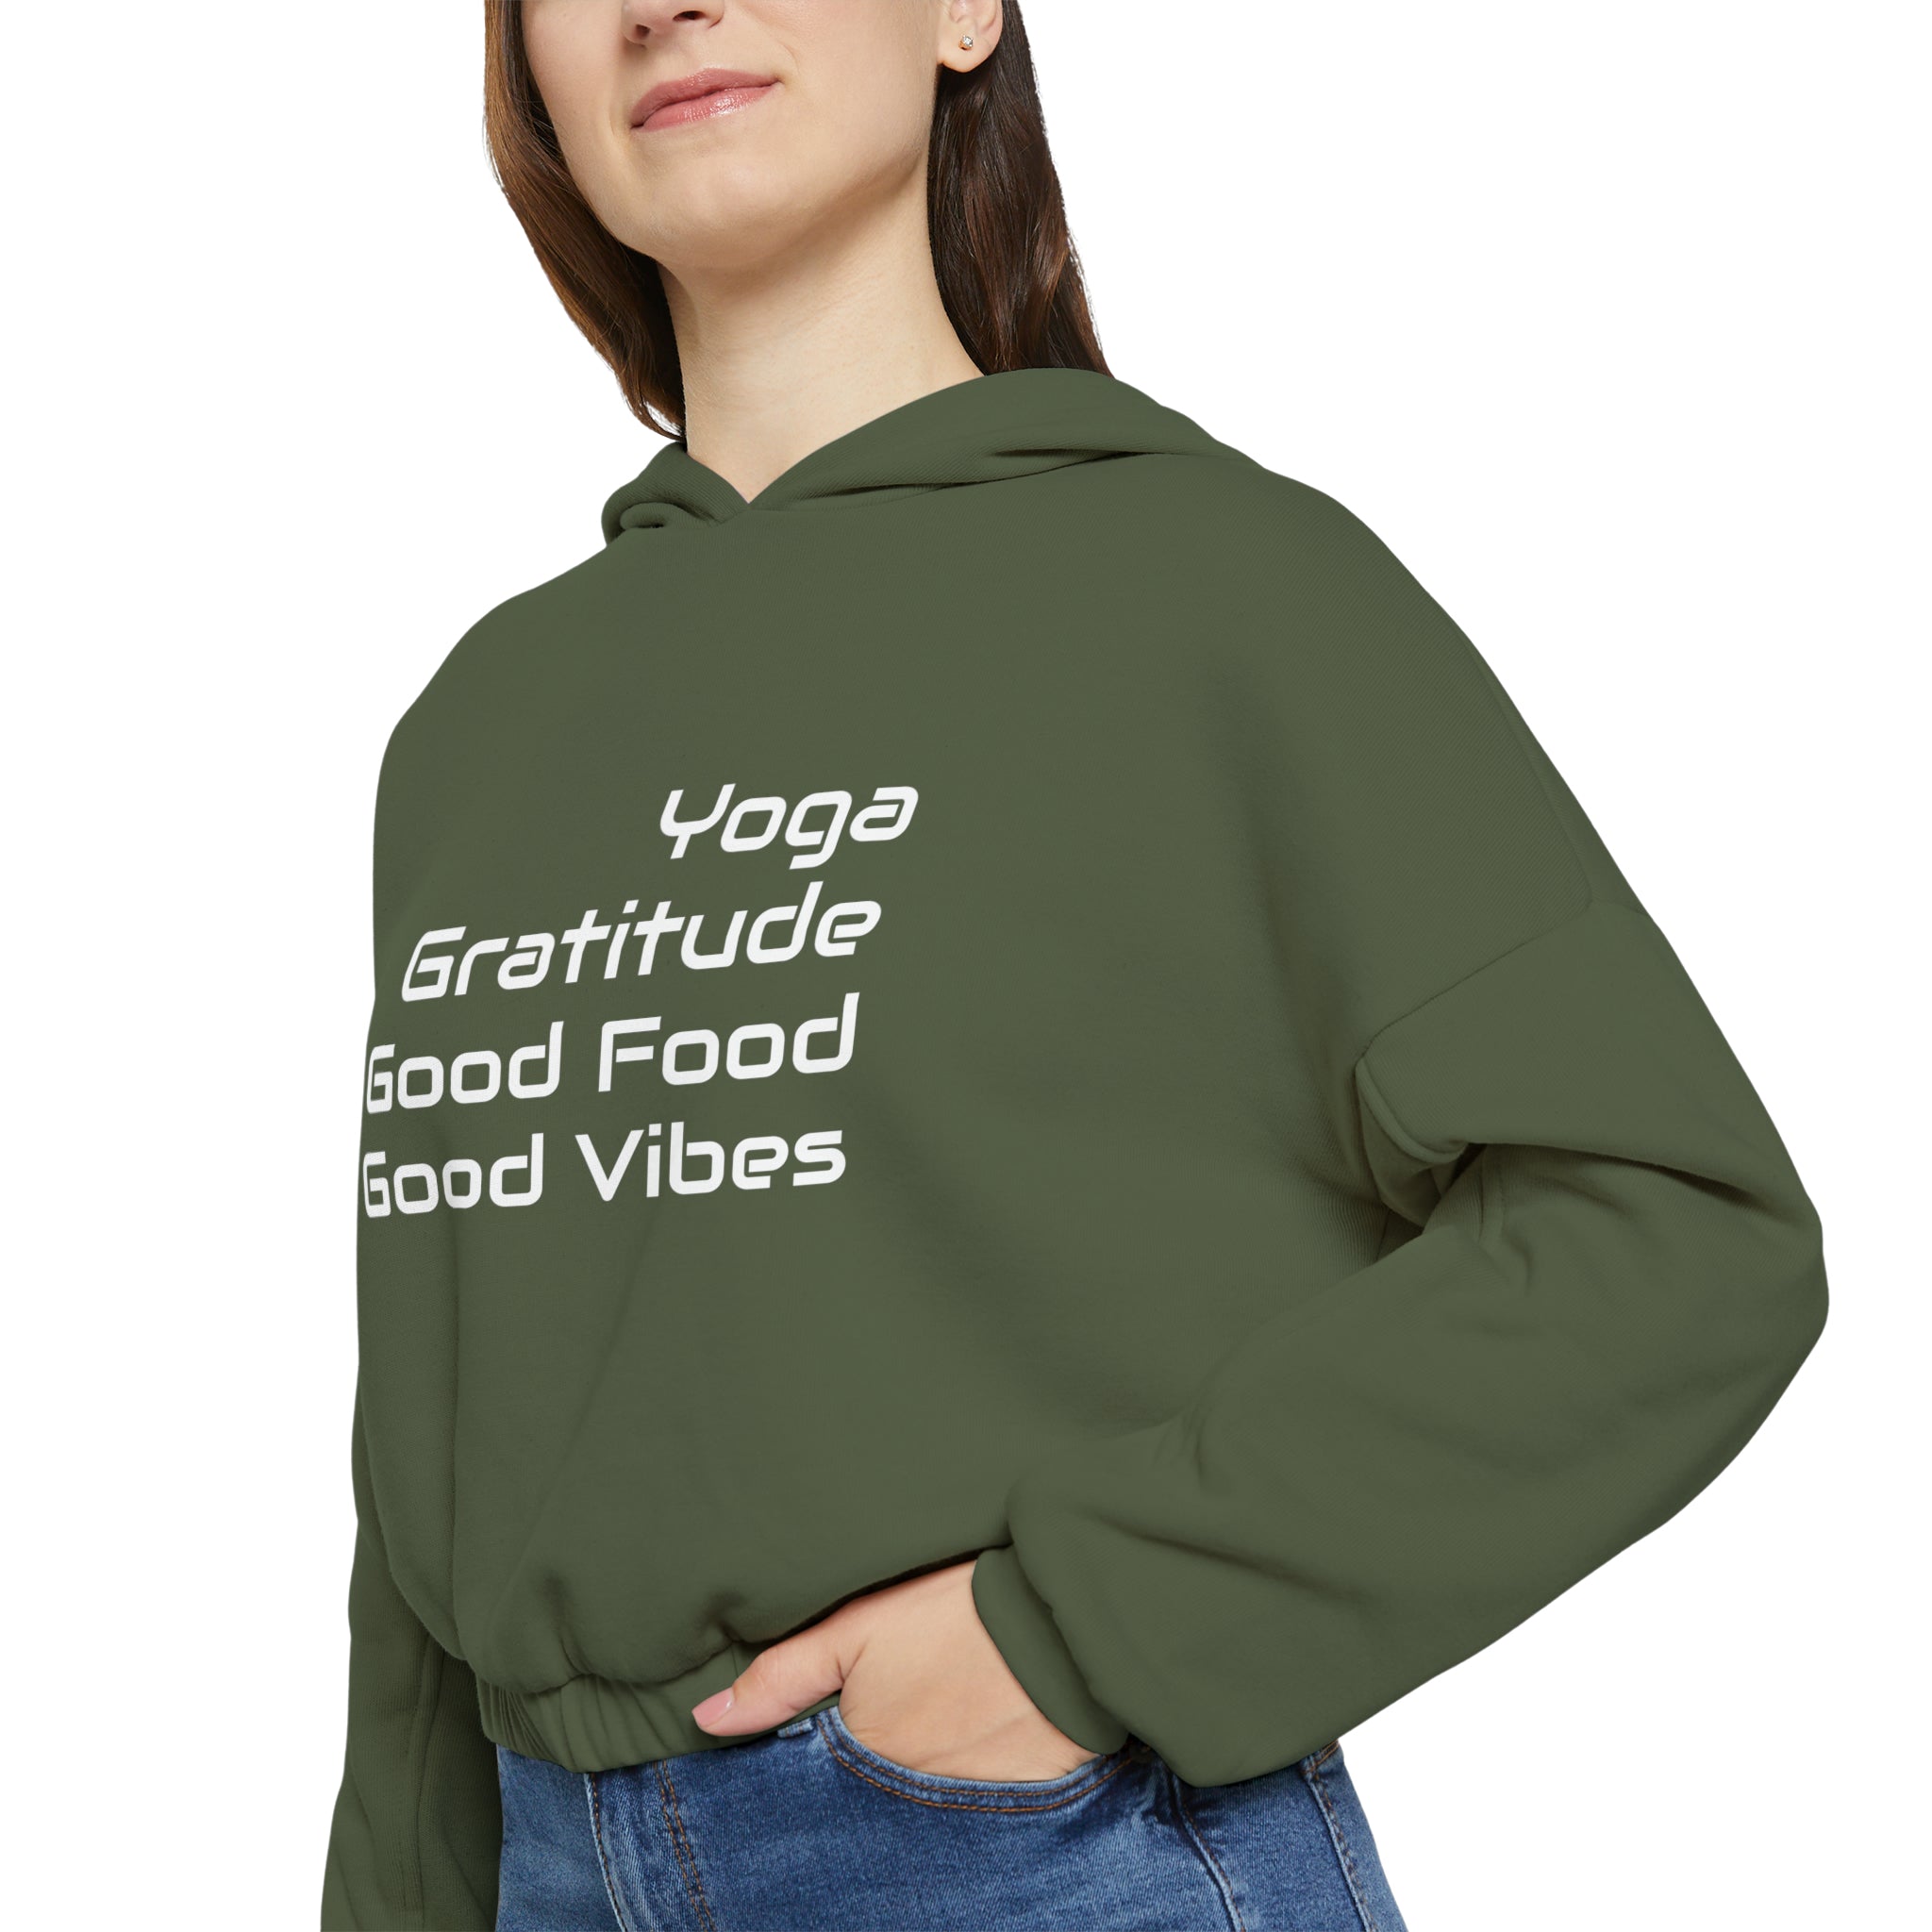 Yoga, Gratitude, Good Food and Good Vibes Cropped Women's Cinched Bottom Hoodie, Green, Gray, Black, Tan